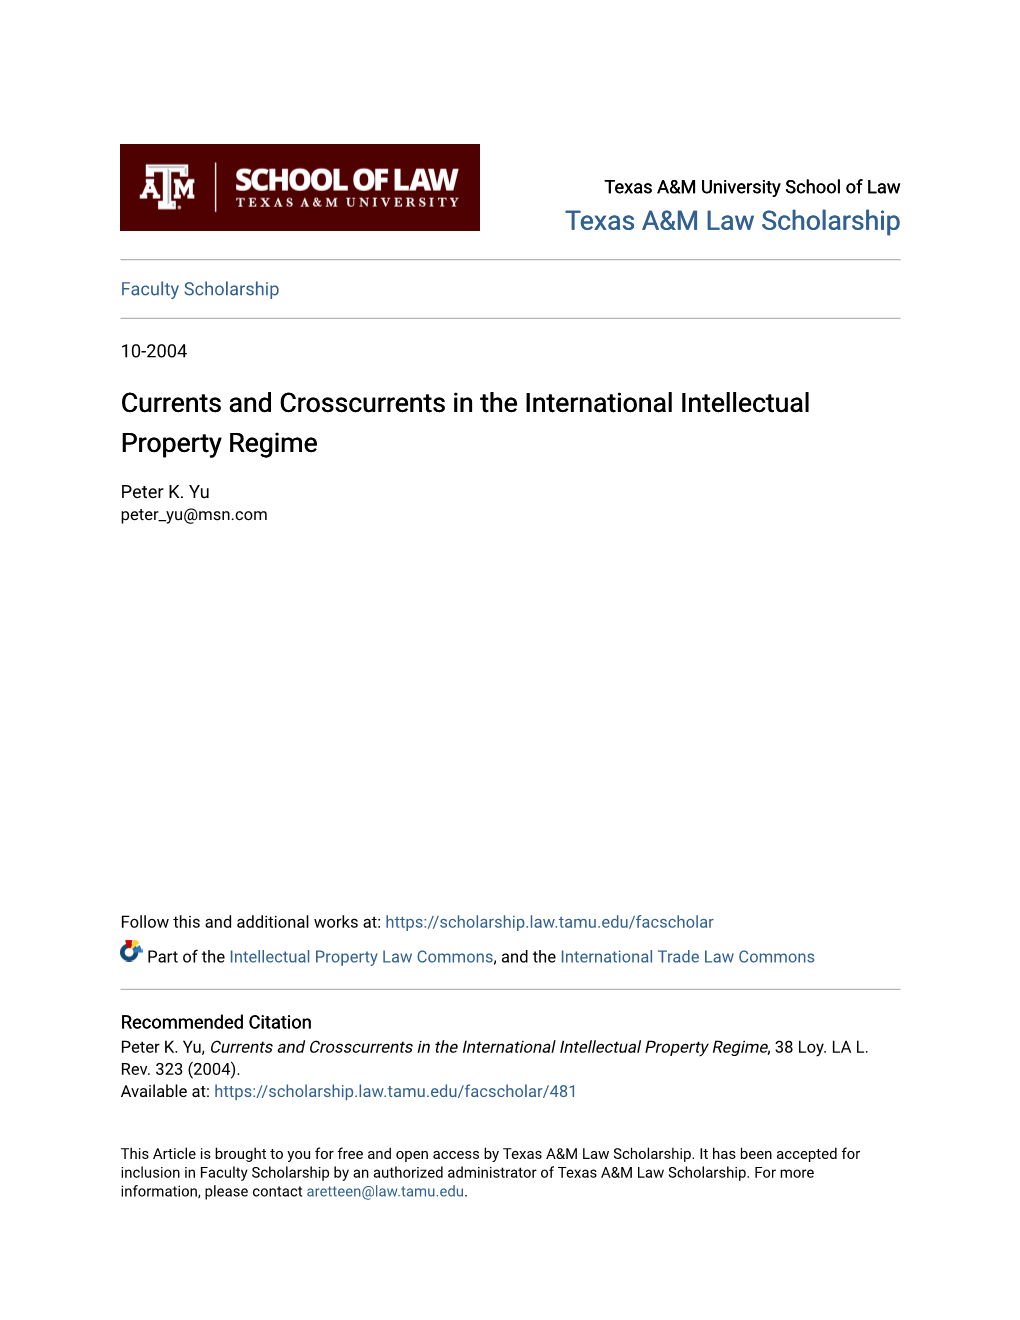 Currents and Crosscurrents in the International Intellectual Property Regime